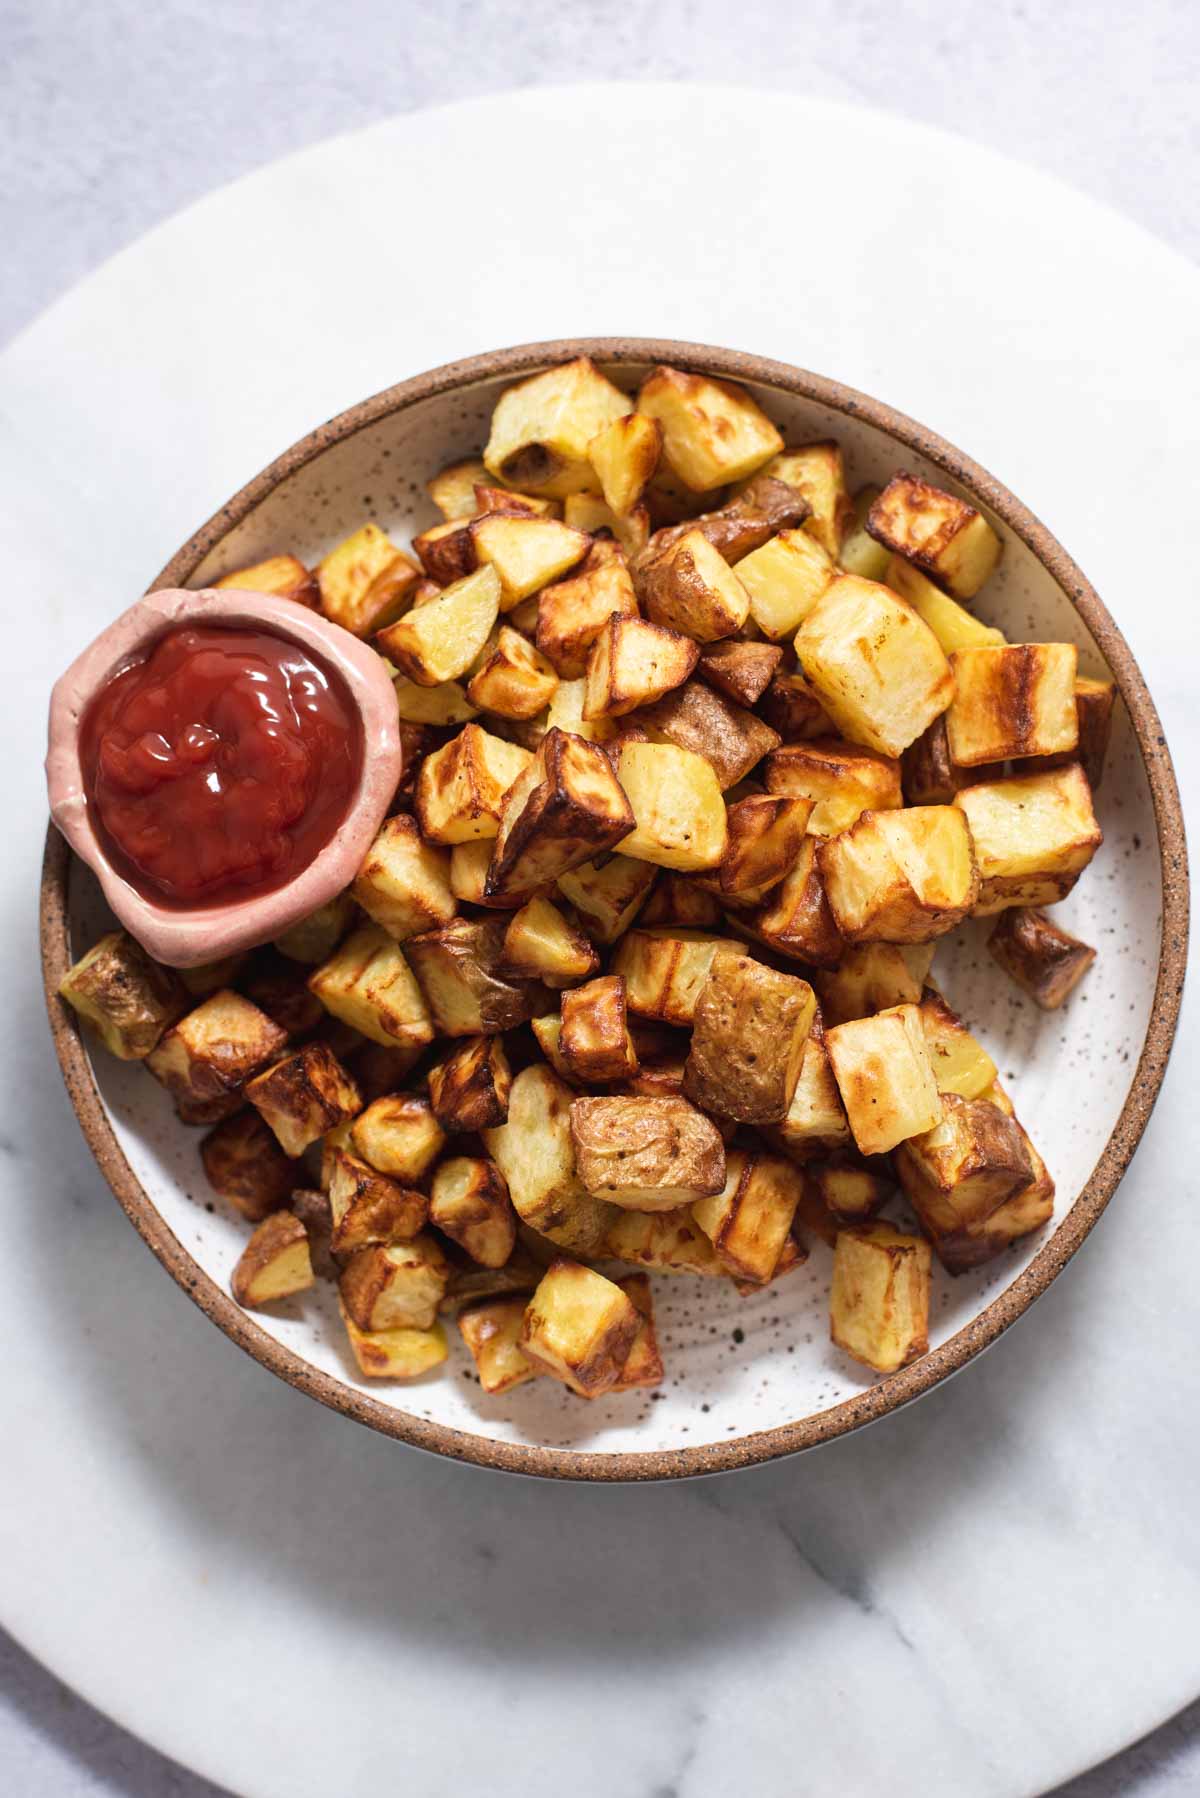 White bowl filled with air fryer roasted potatoes and a bowl of ketchup.